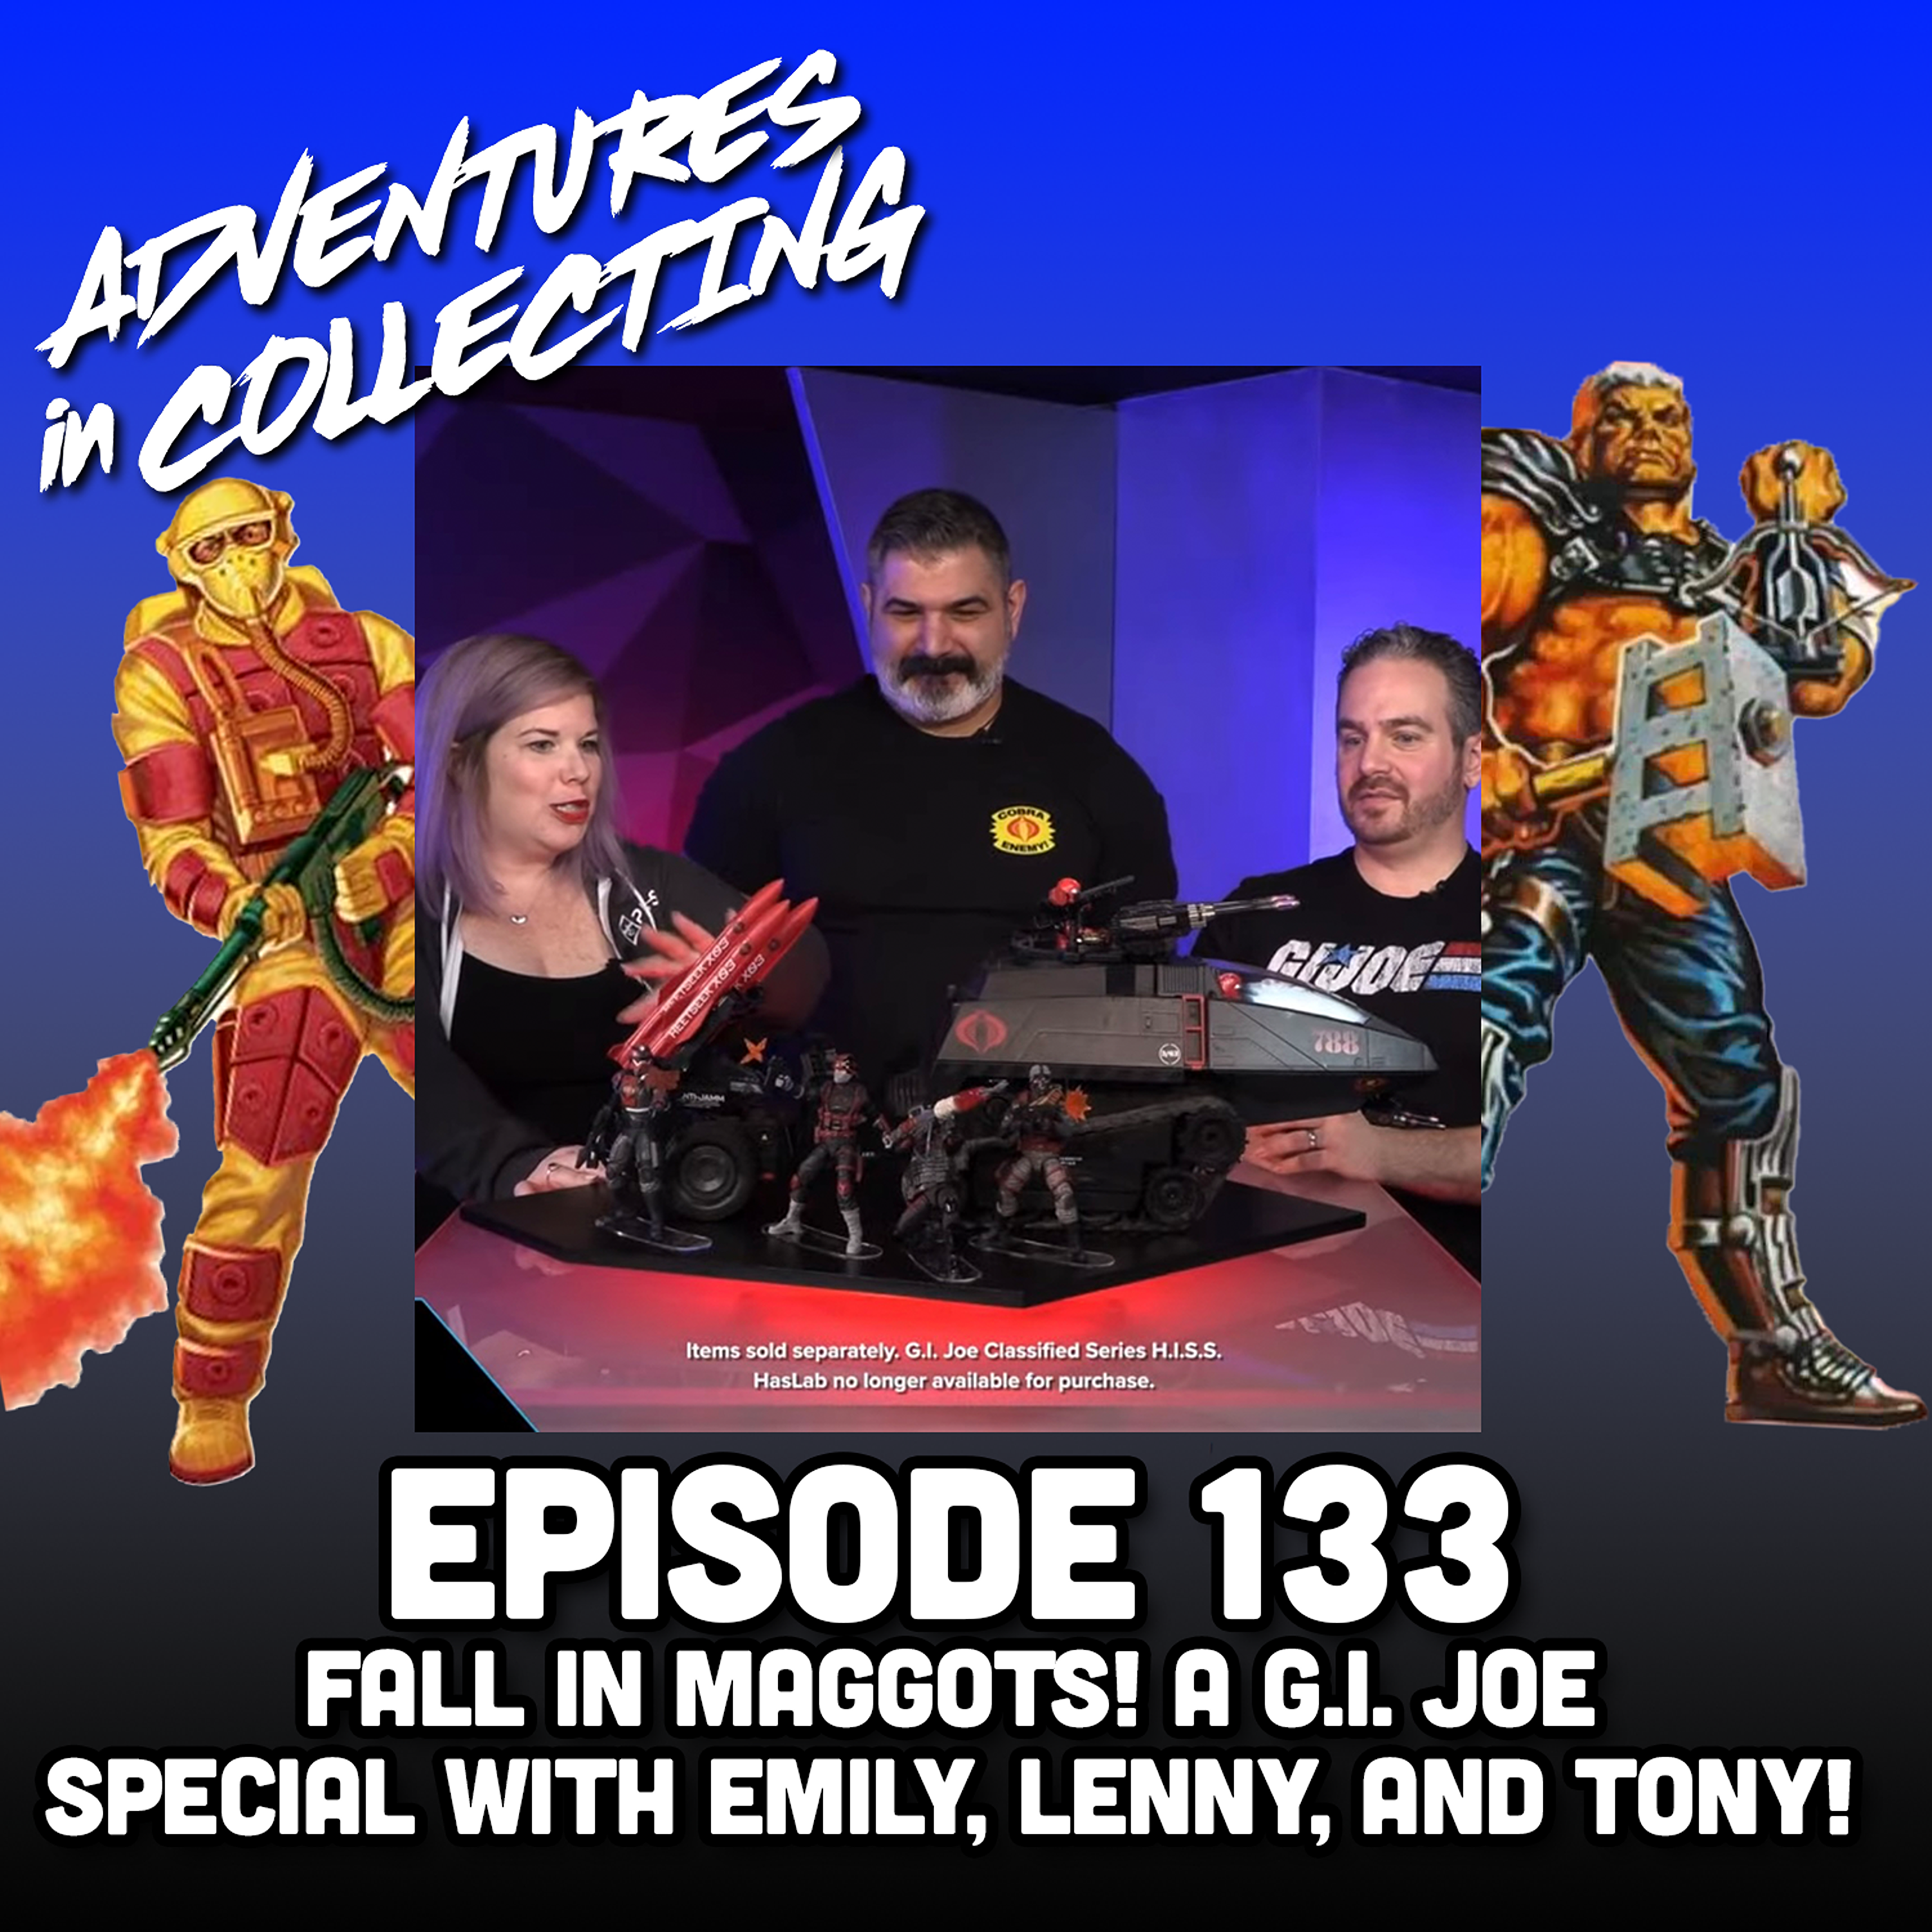 Fall in, Maggots! A G.I. Joe Special with Emily, Lenny, and Tony! – Adventures in Collecting